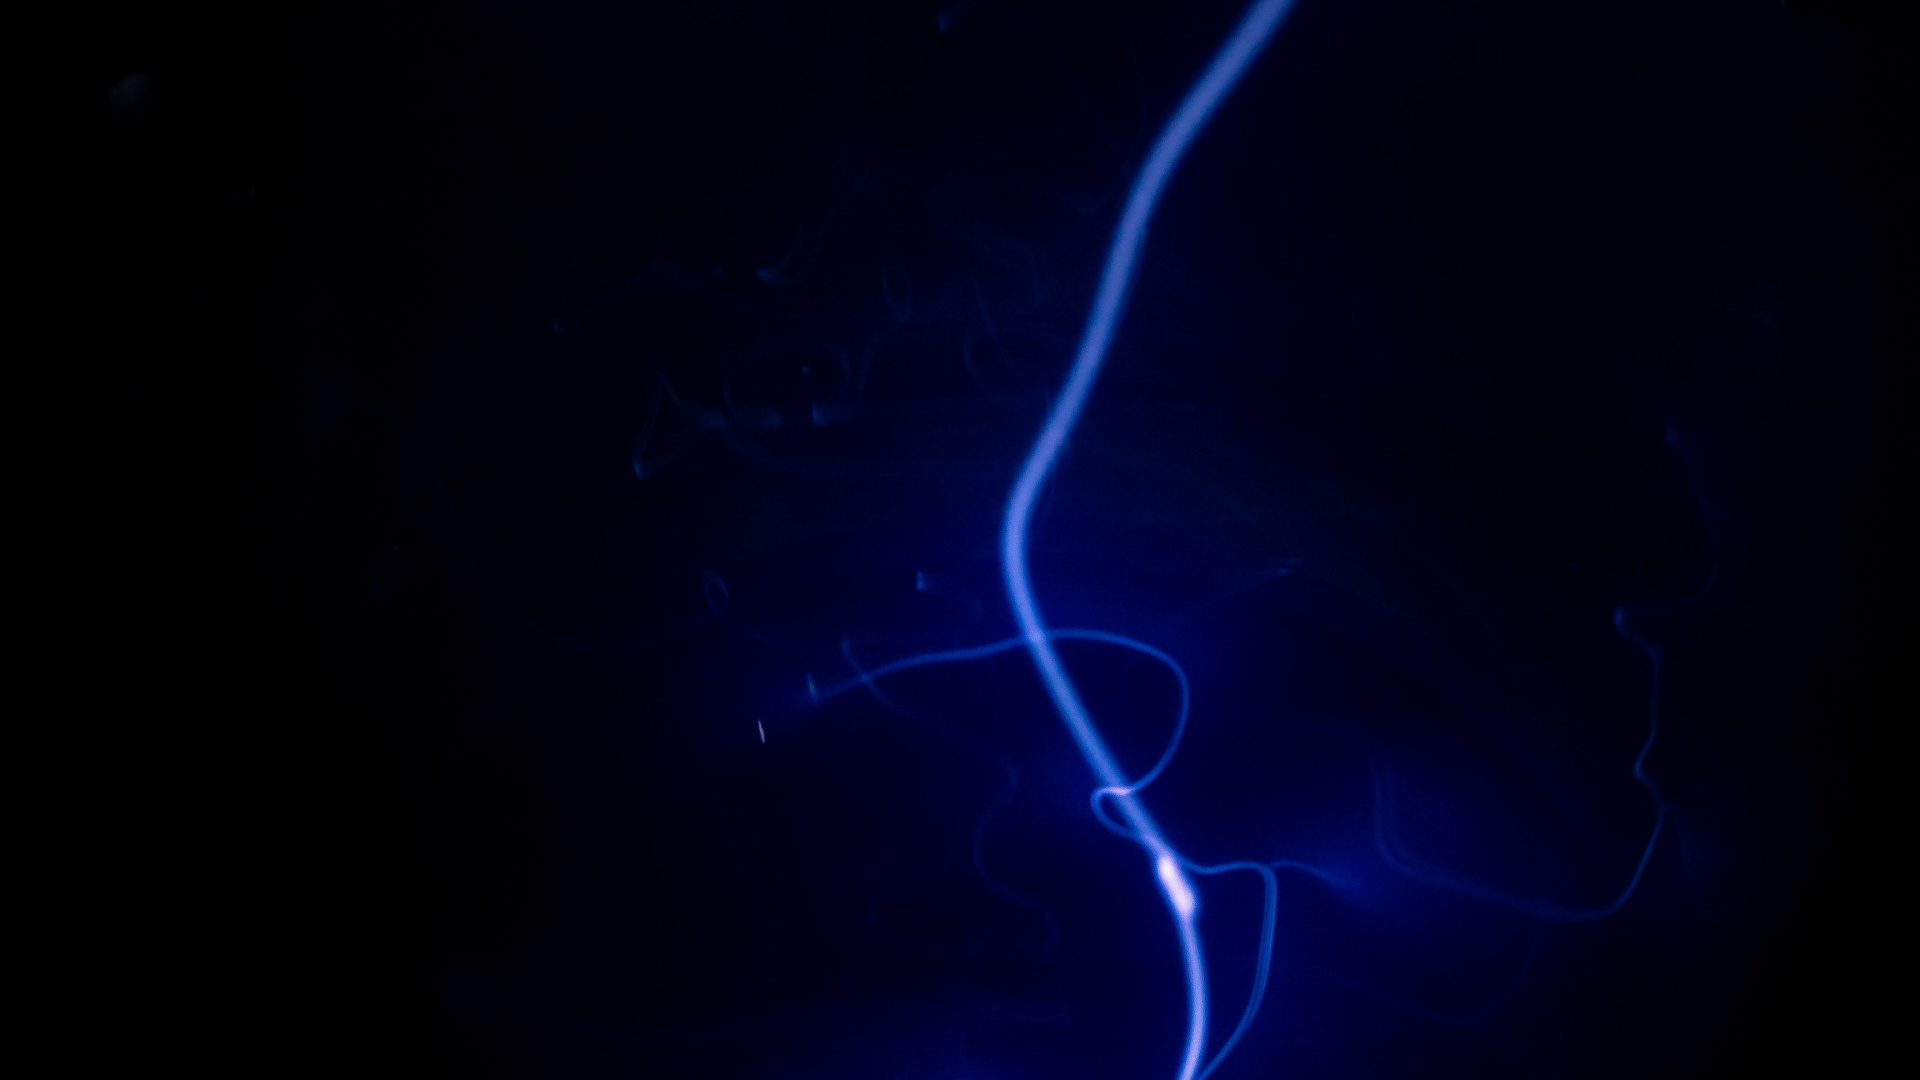 Blue and White Light Illustration. Wallpaper in 1920x1080 Resolution